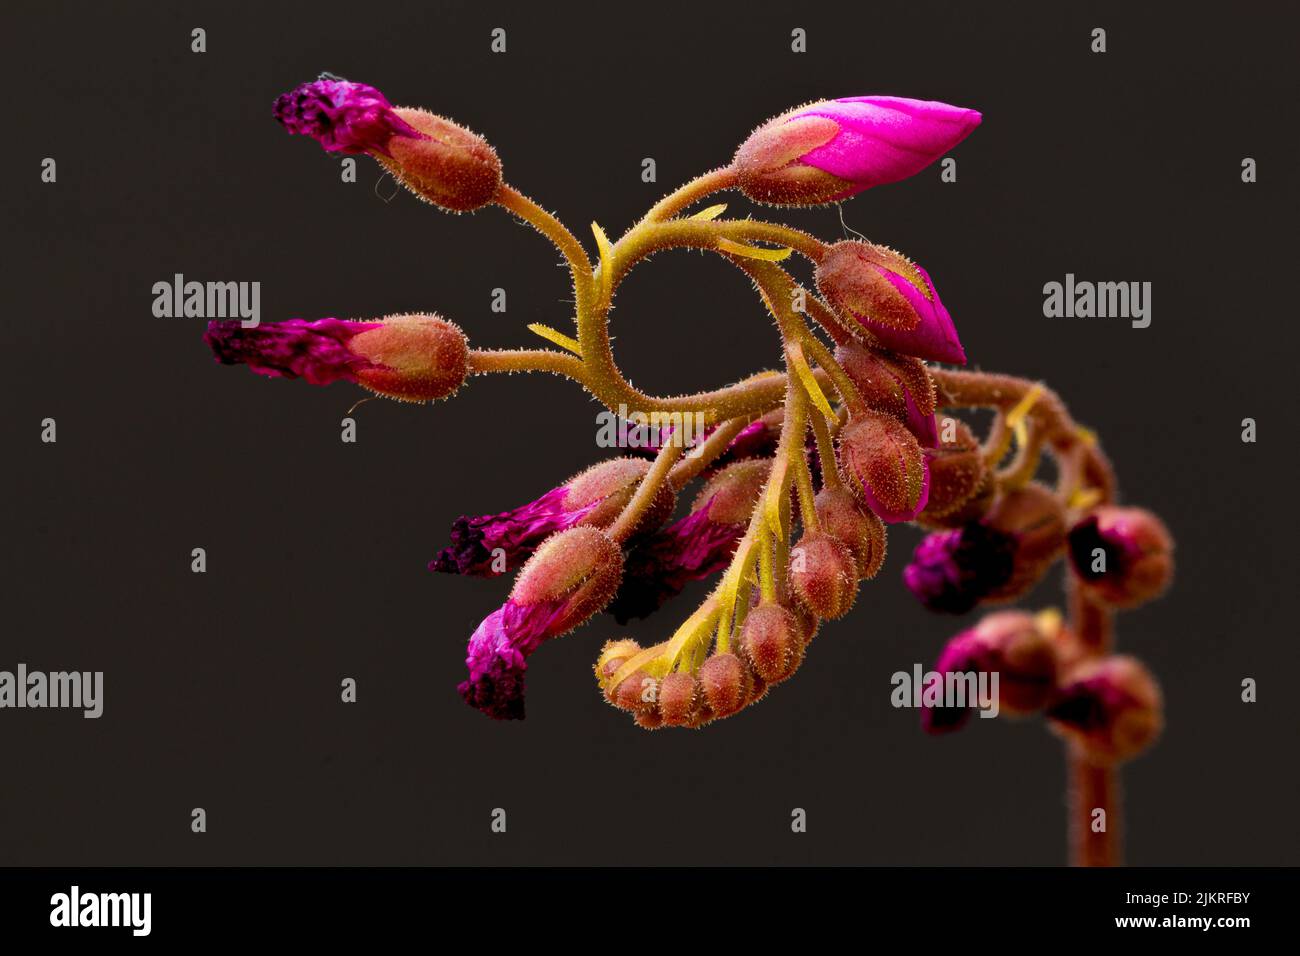 Cape Sundew, drosera capensis Buds flowers one bud at a time for 6 hours in a day, then dies back - the next bud flowers and the process repeats Stock Photo